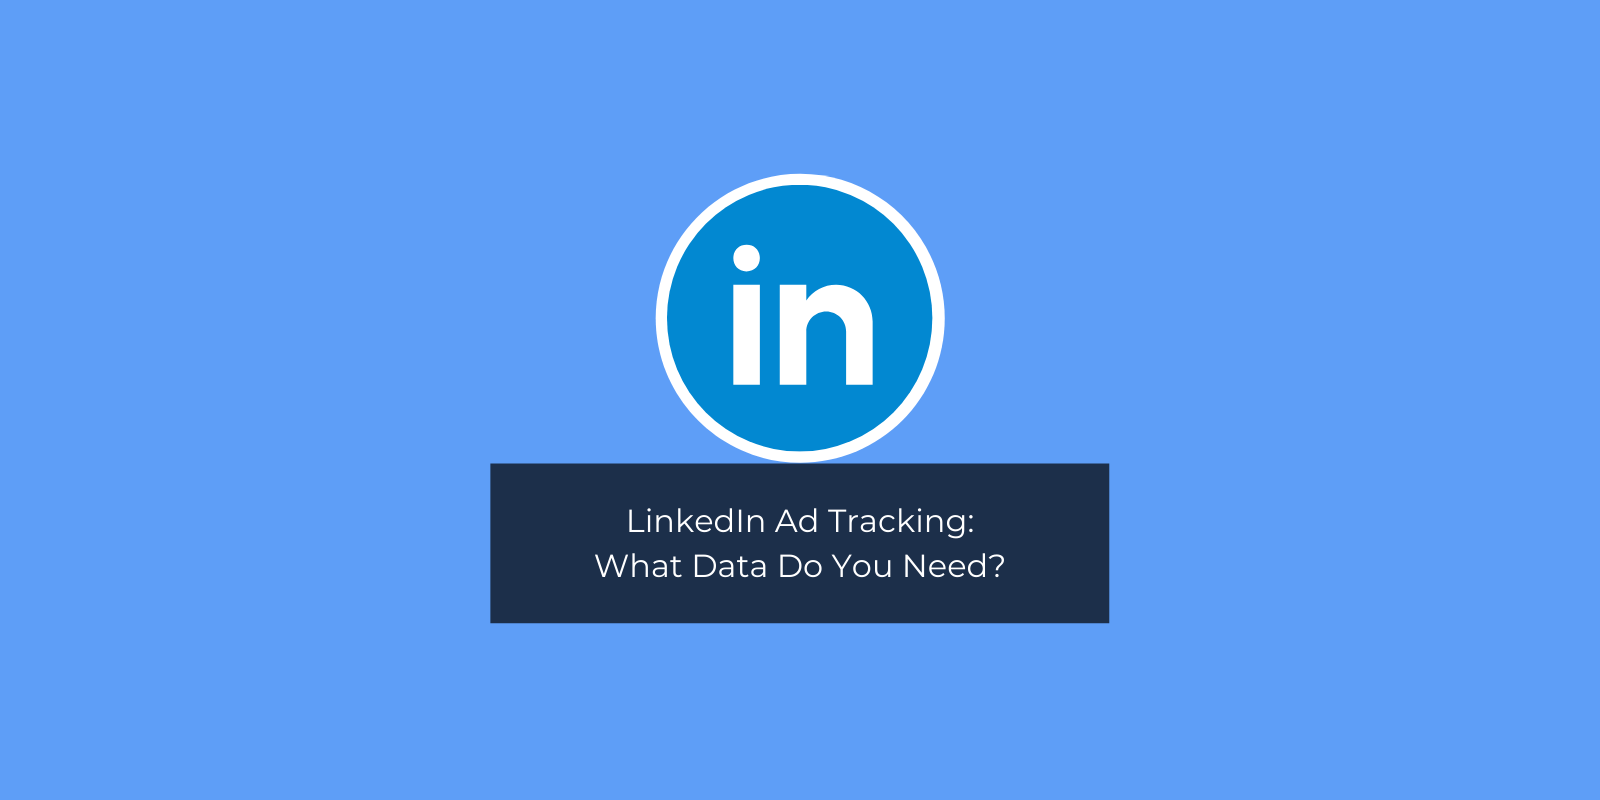 LinkedIn Ad Tracking: What Data Do You Need?